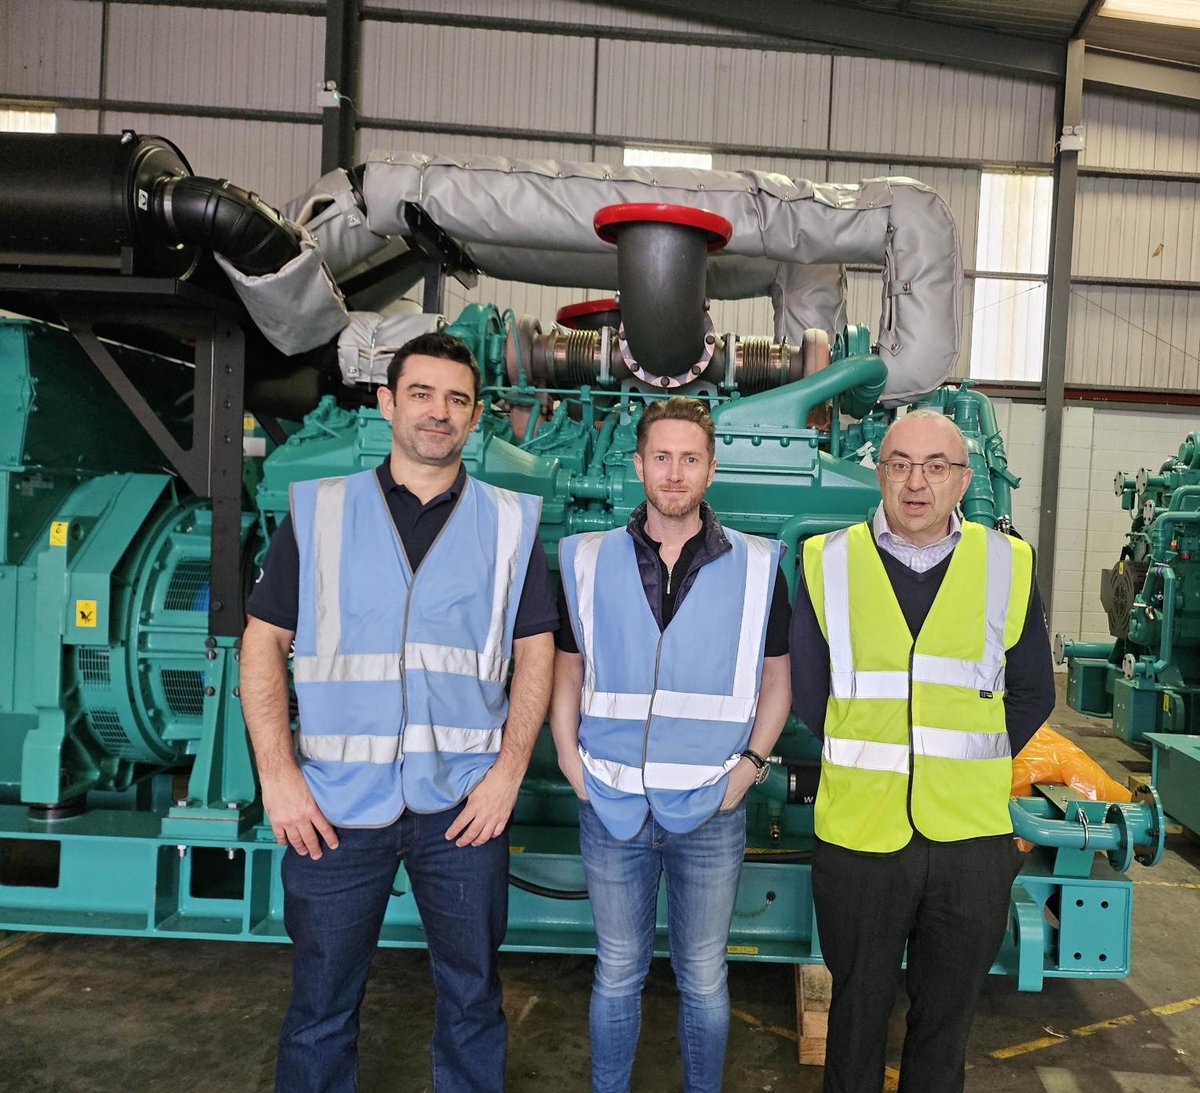 Another important step in the development of our new Manchester data centre site - the generator. This Cummins engine - supplied by @DTGenHQ - will serve our MCR2 facility in Wythenshawe when the site goes live later this year.